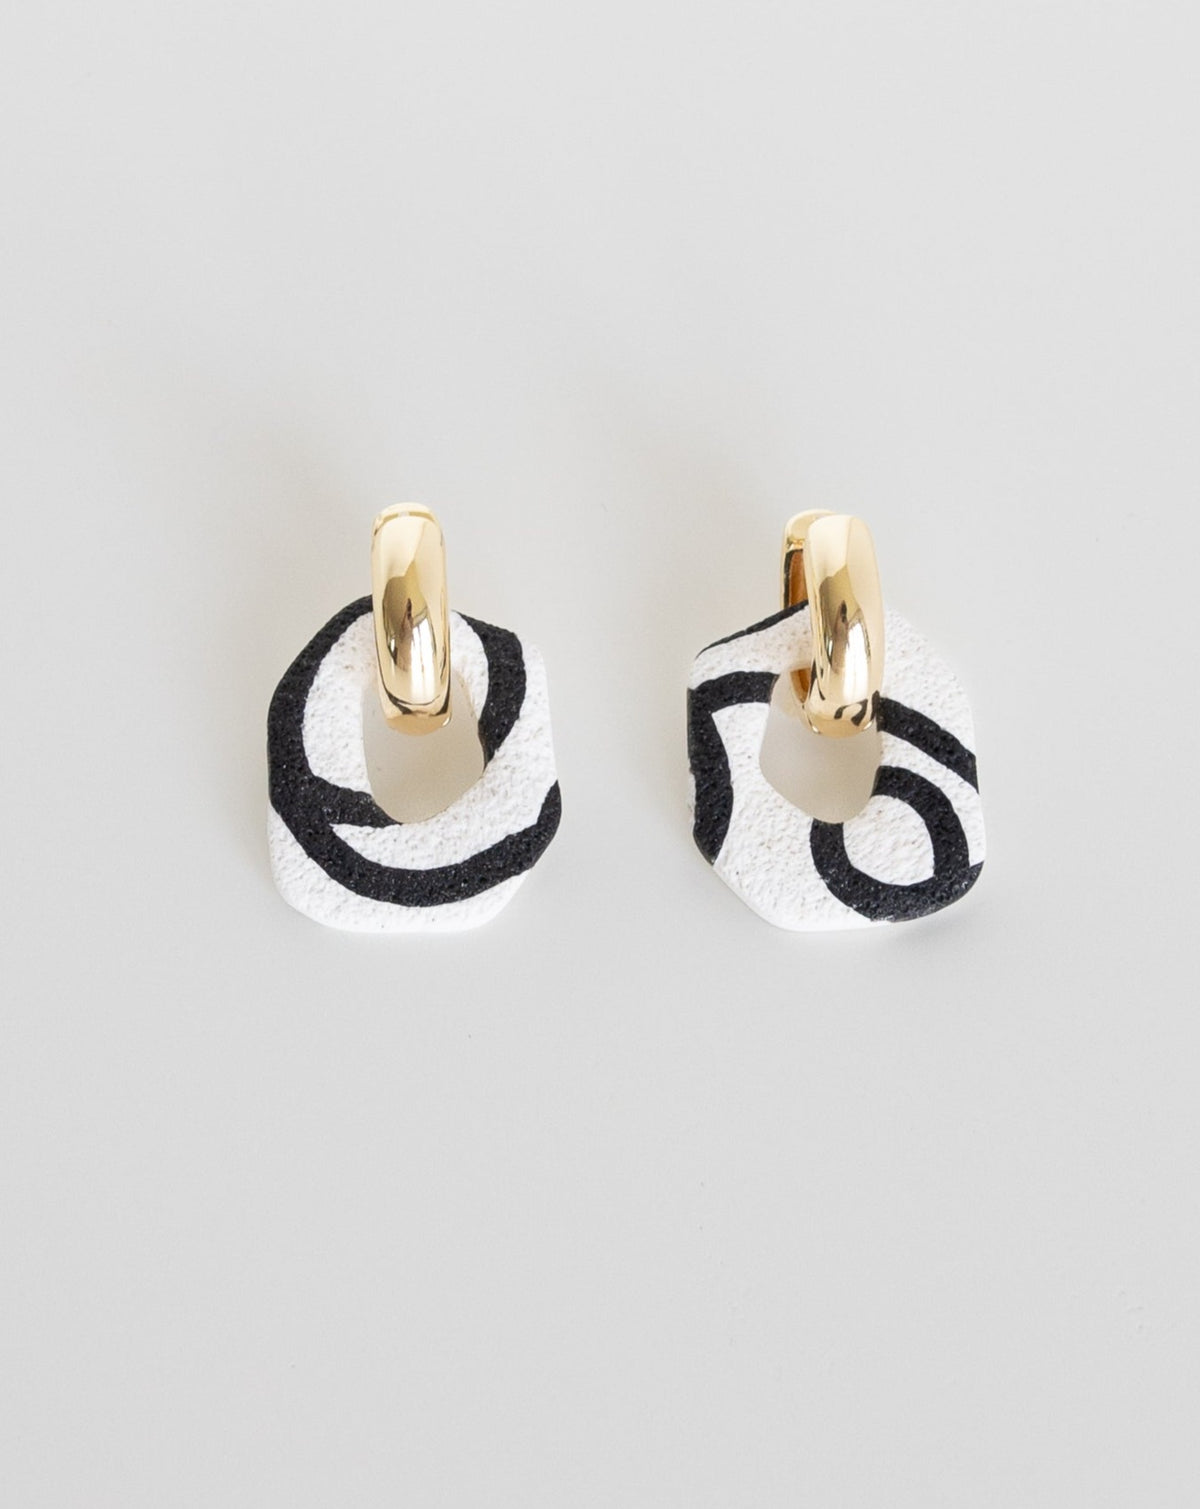 Darien earrings in Abstract White color with gold hoops, front view